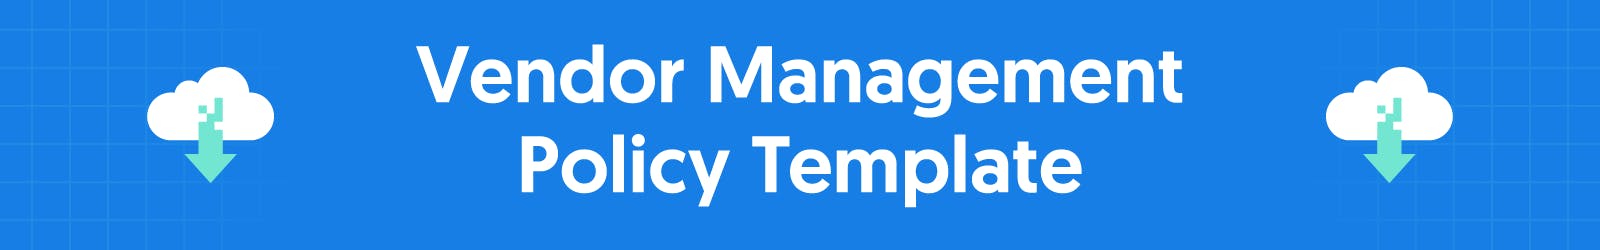 Blue button with text reading: Vendor Management Policy Template